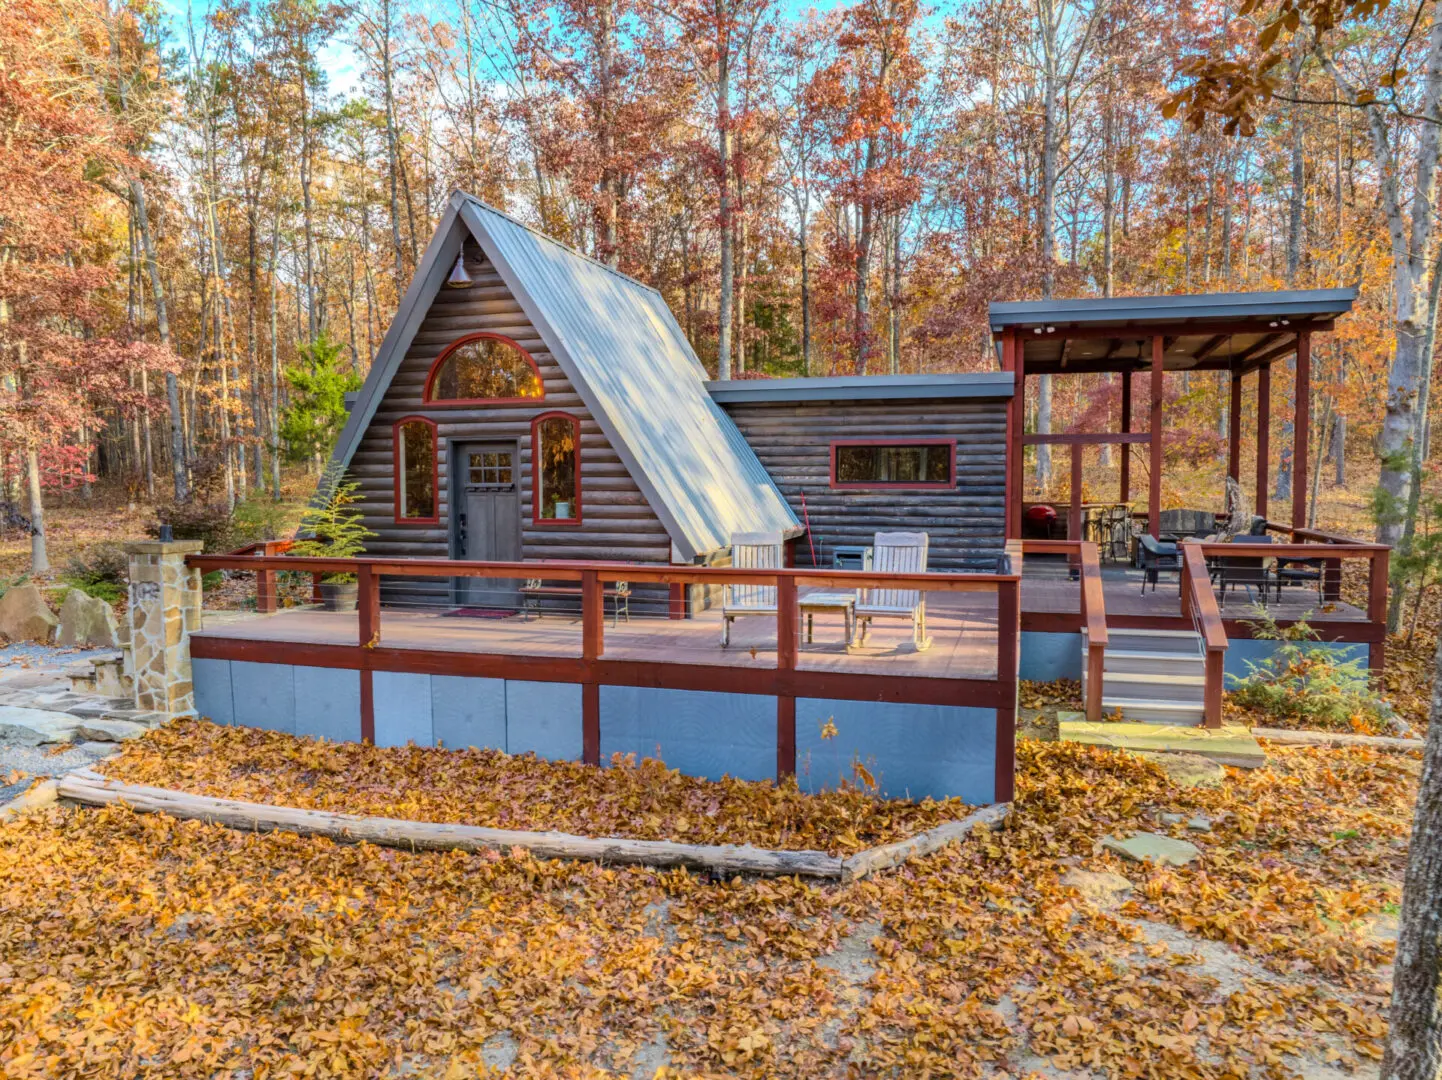 A cabin with a deck and a porch in the woods available for rental in Mentone.